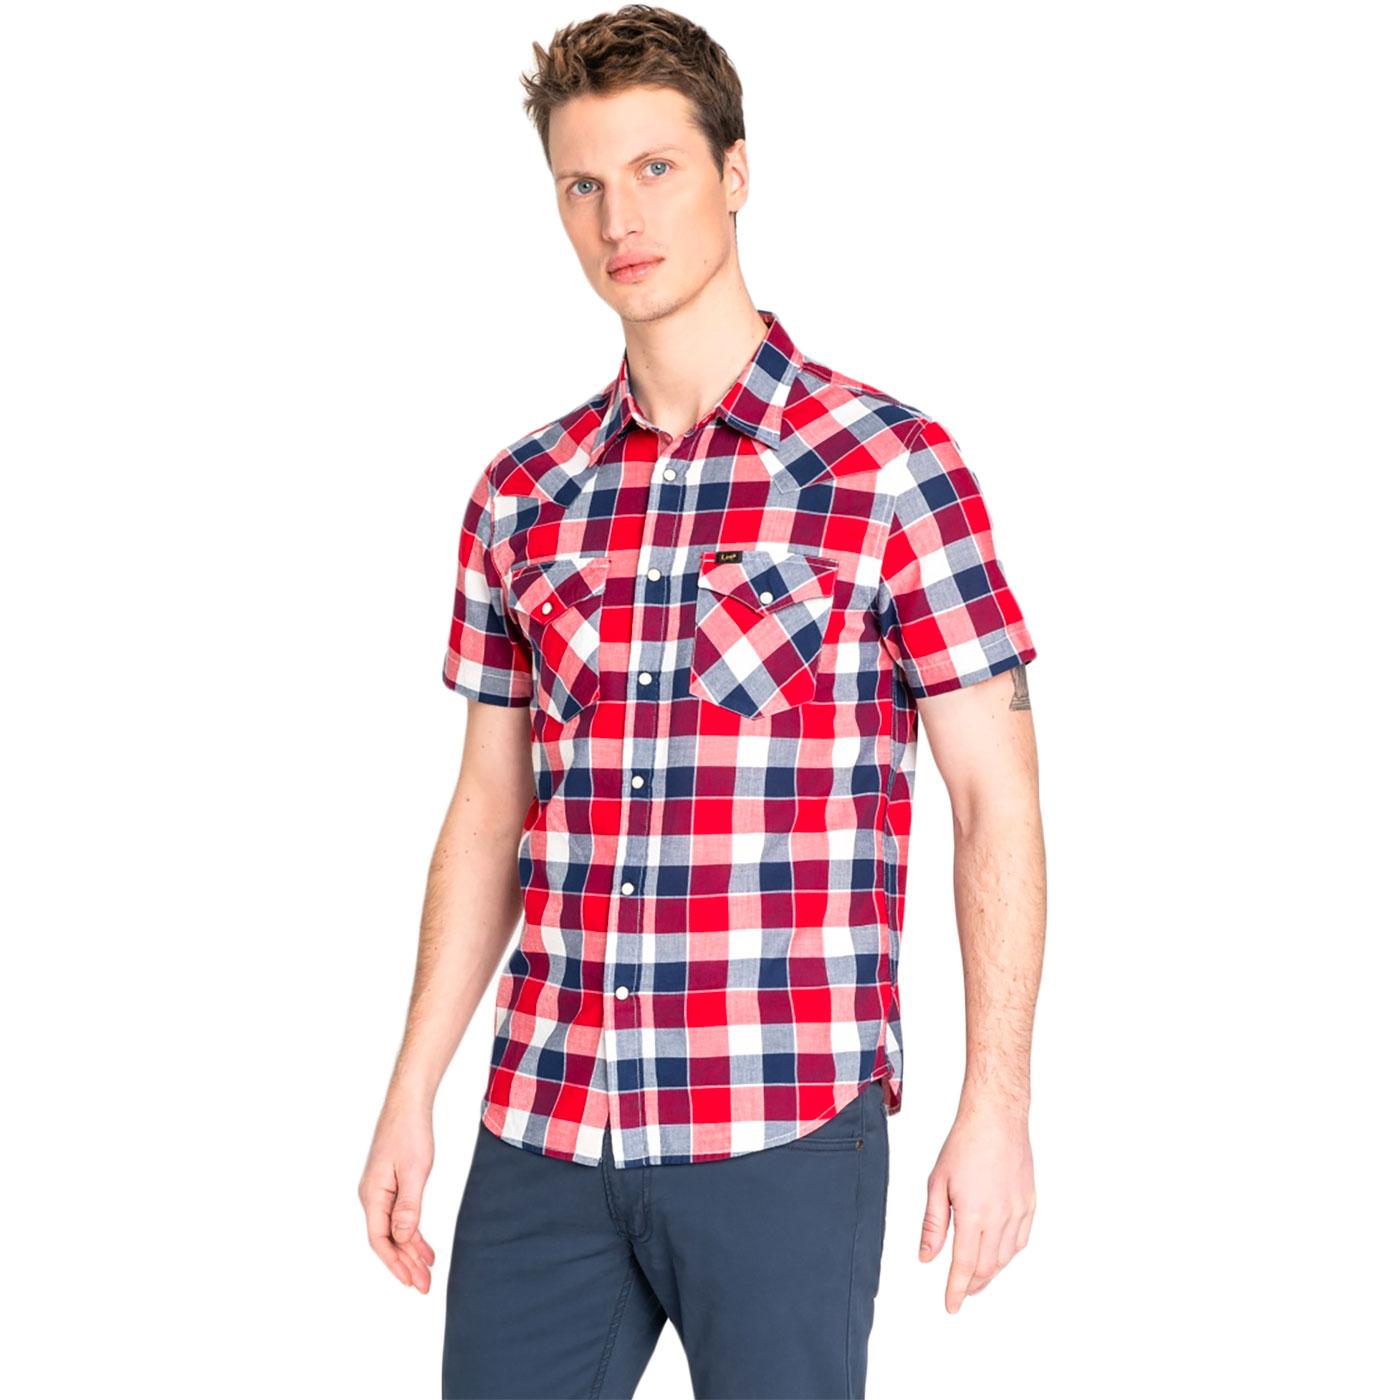 LEE Retro Mod SS Check Western Shirt (Bright Red)